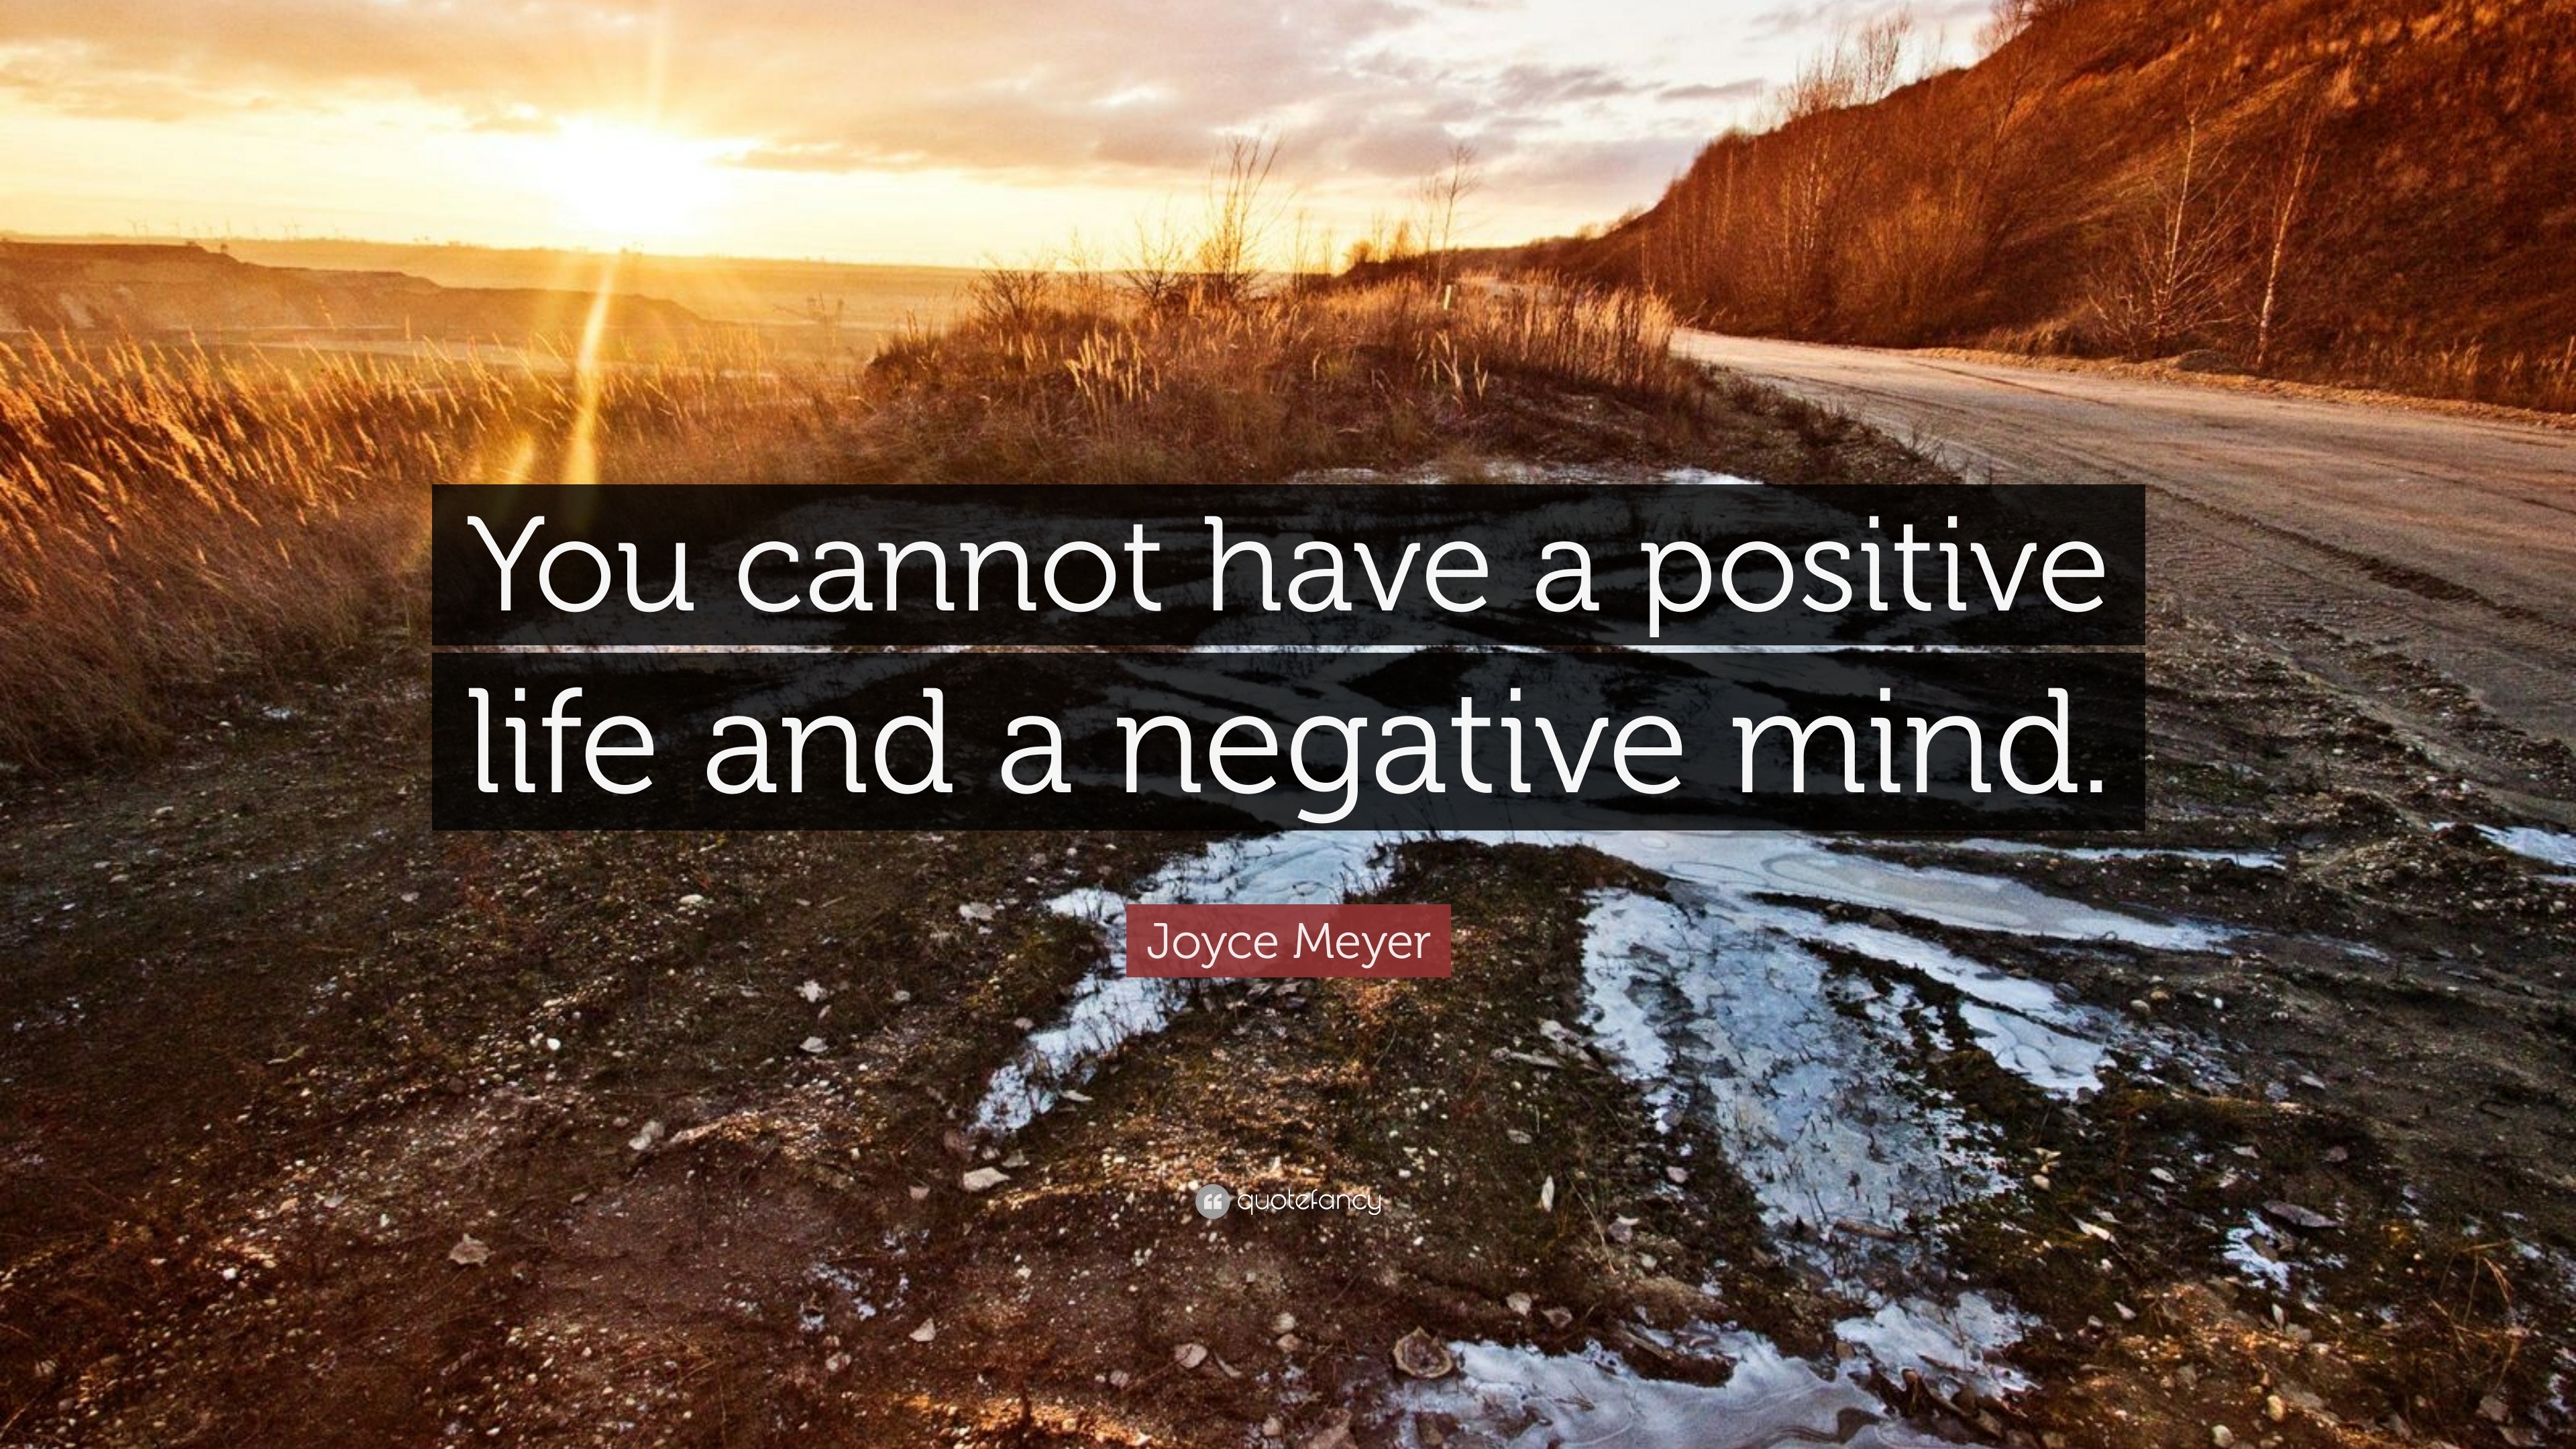 Joyce Meyer Quote: “You cannot have a positive life and a negative mind.”